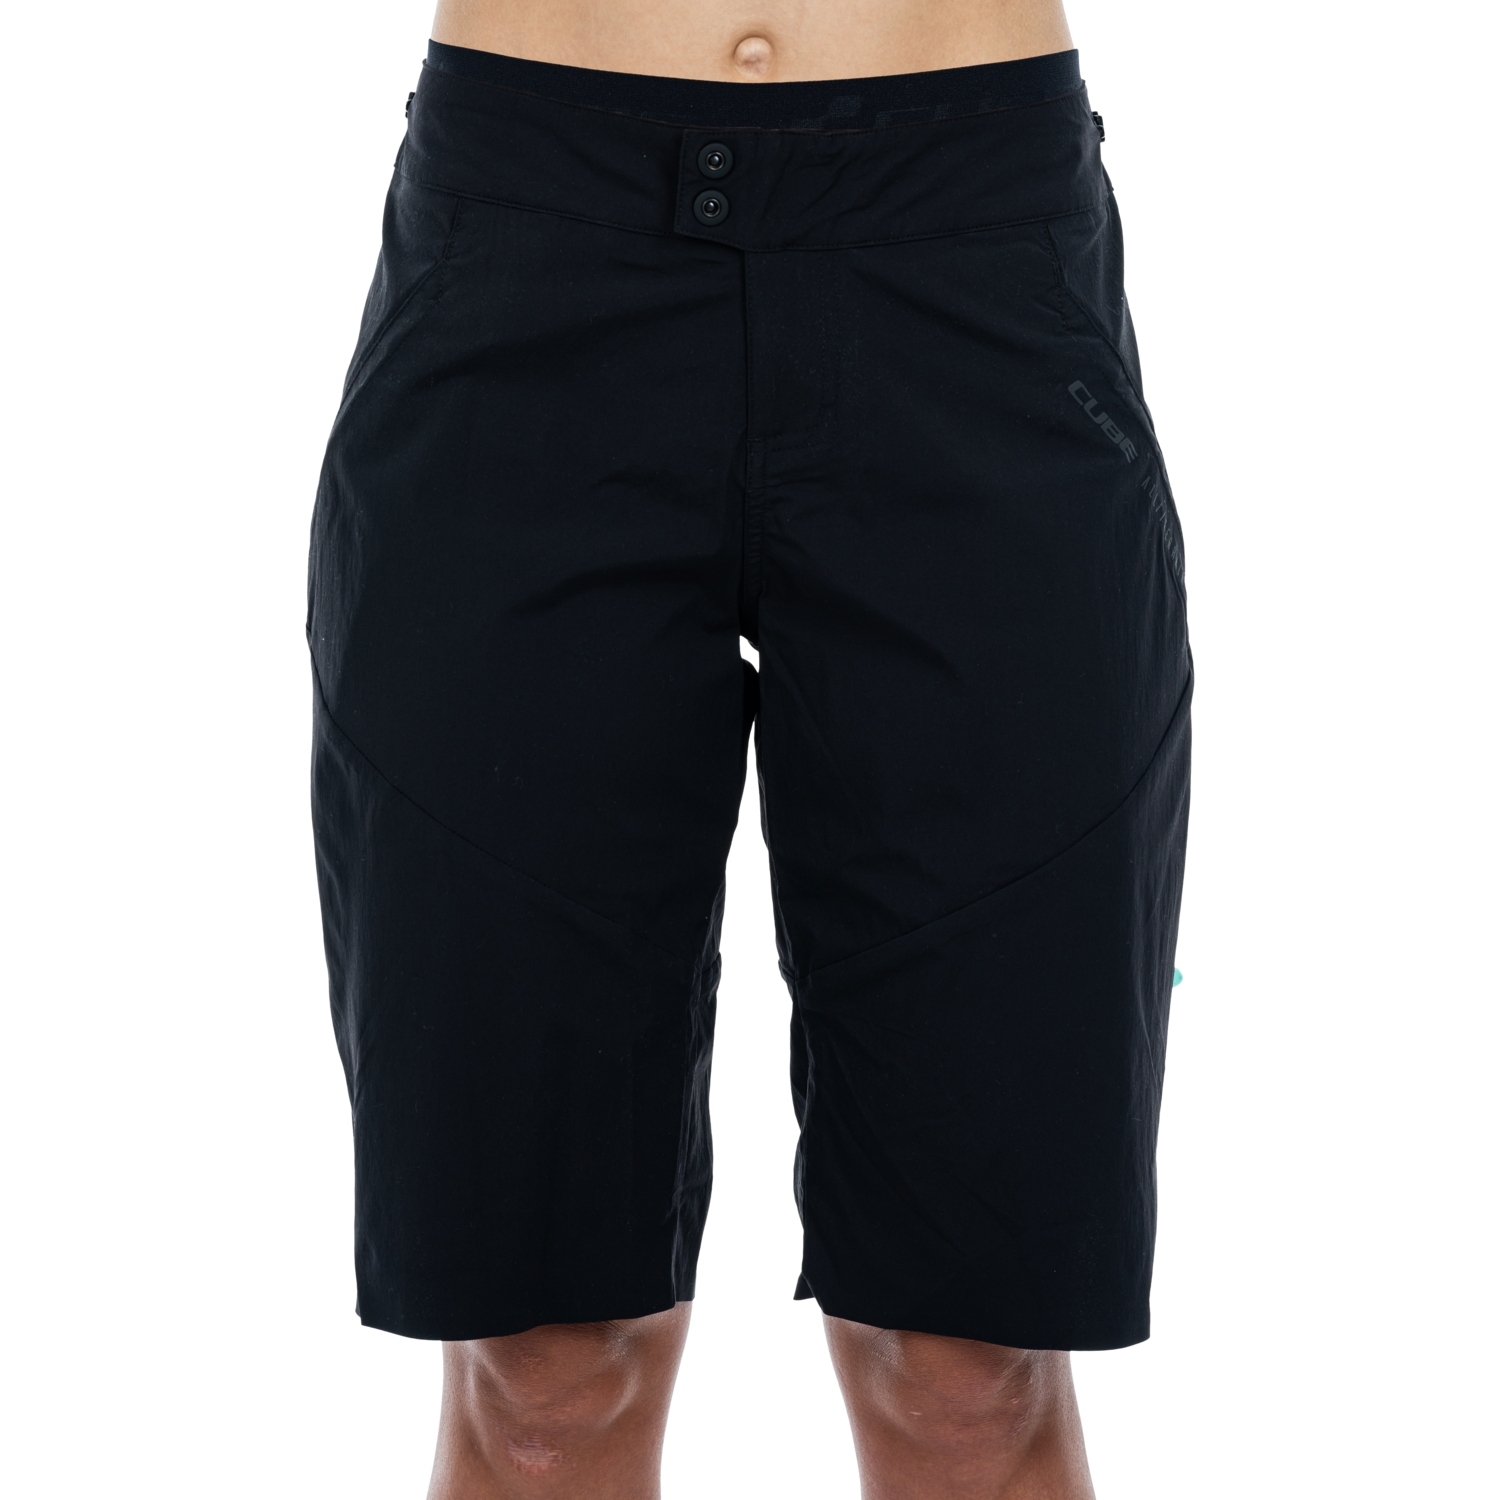 Picture of CUBE ATX Baggy Shorts incl. Liner Shorts Women - black